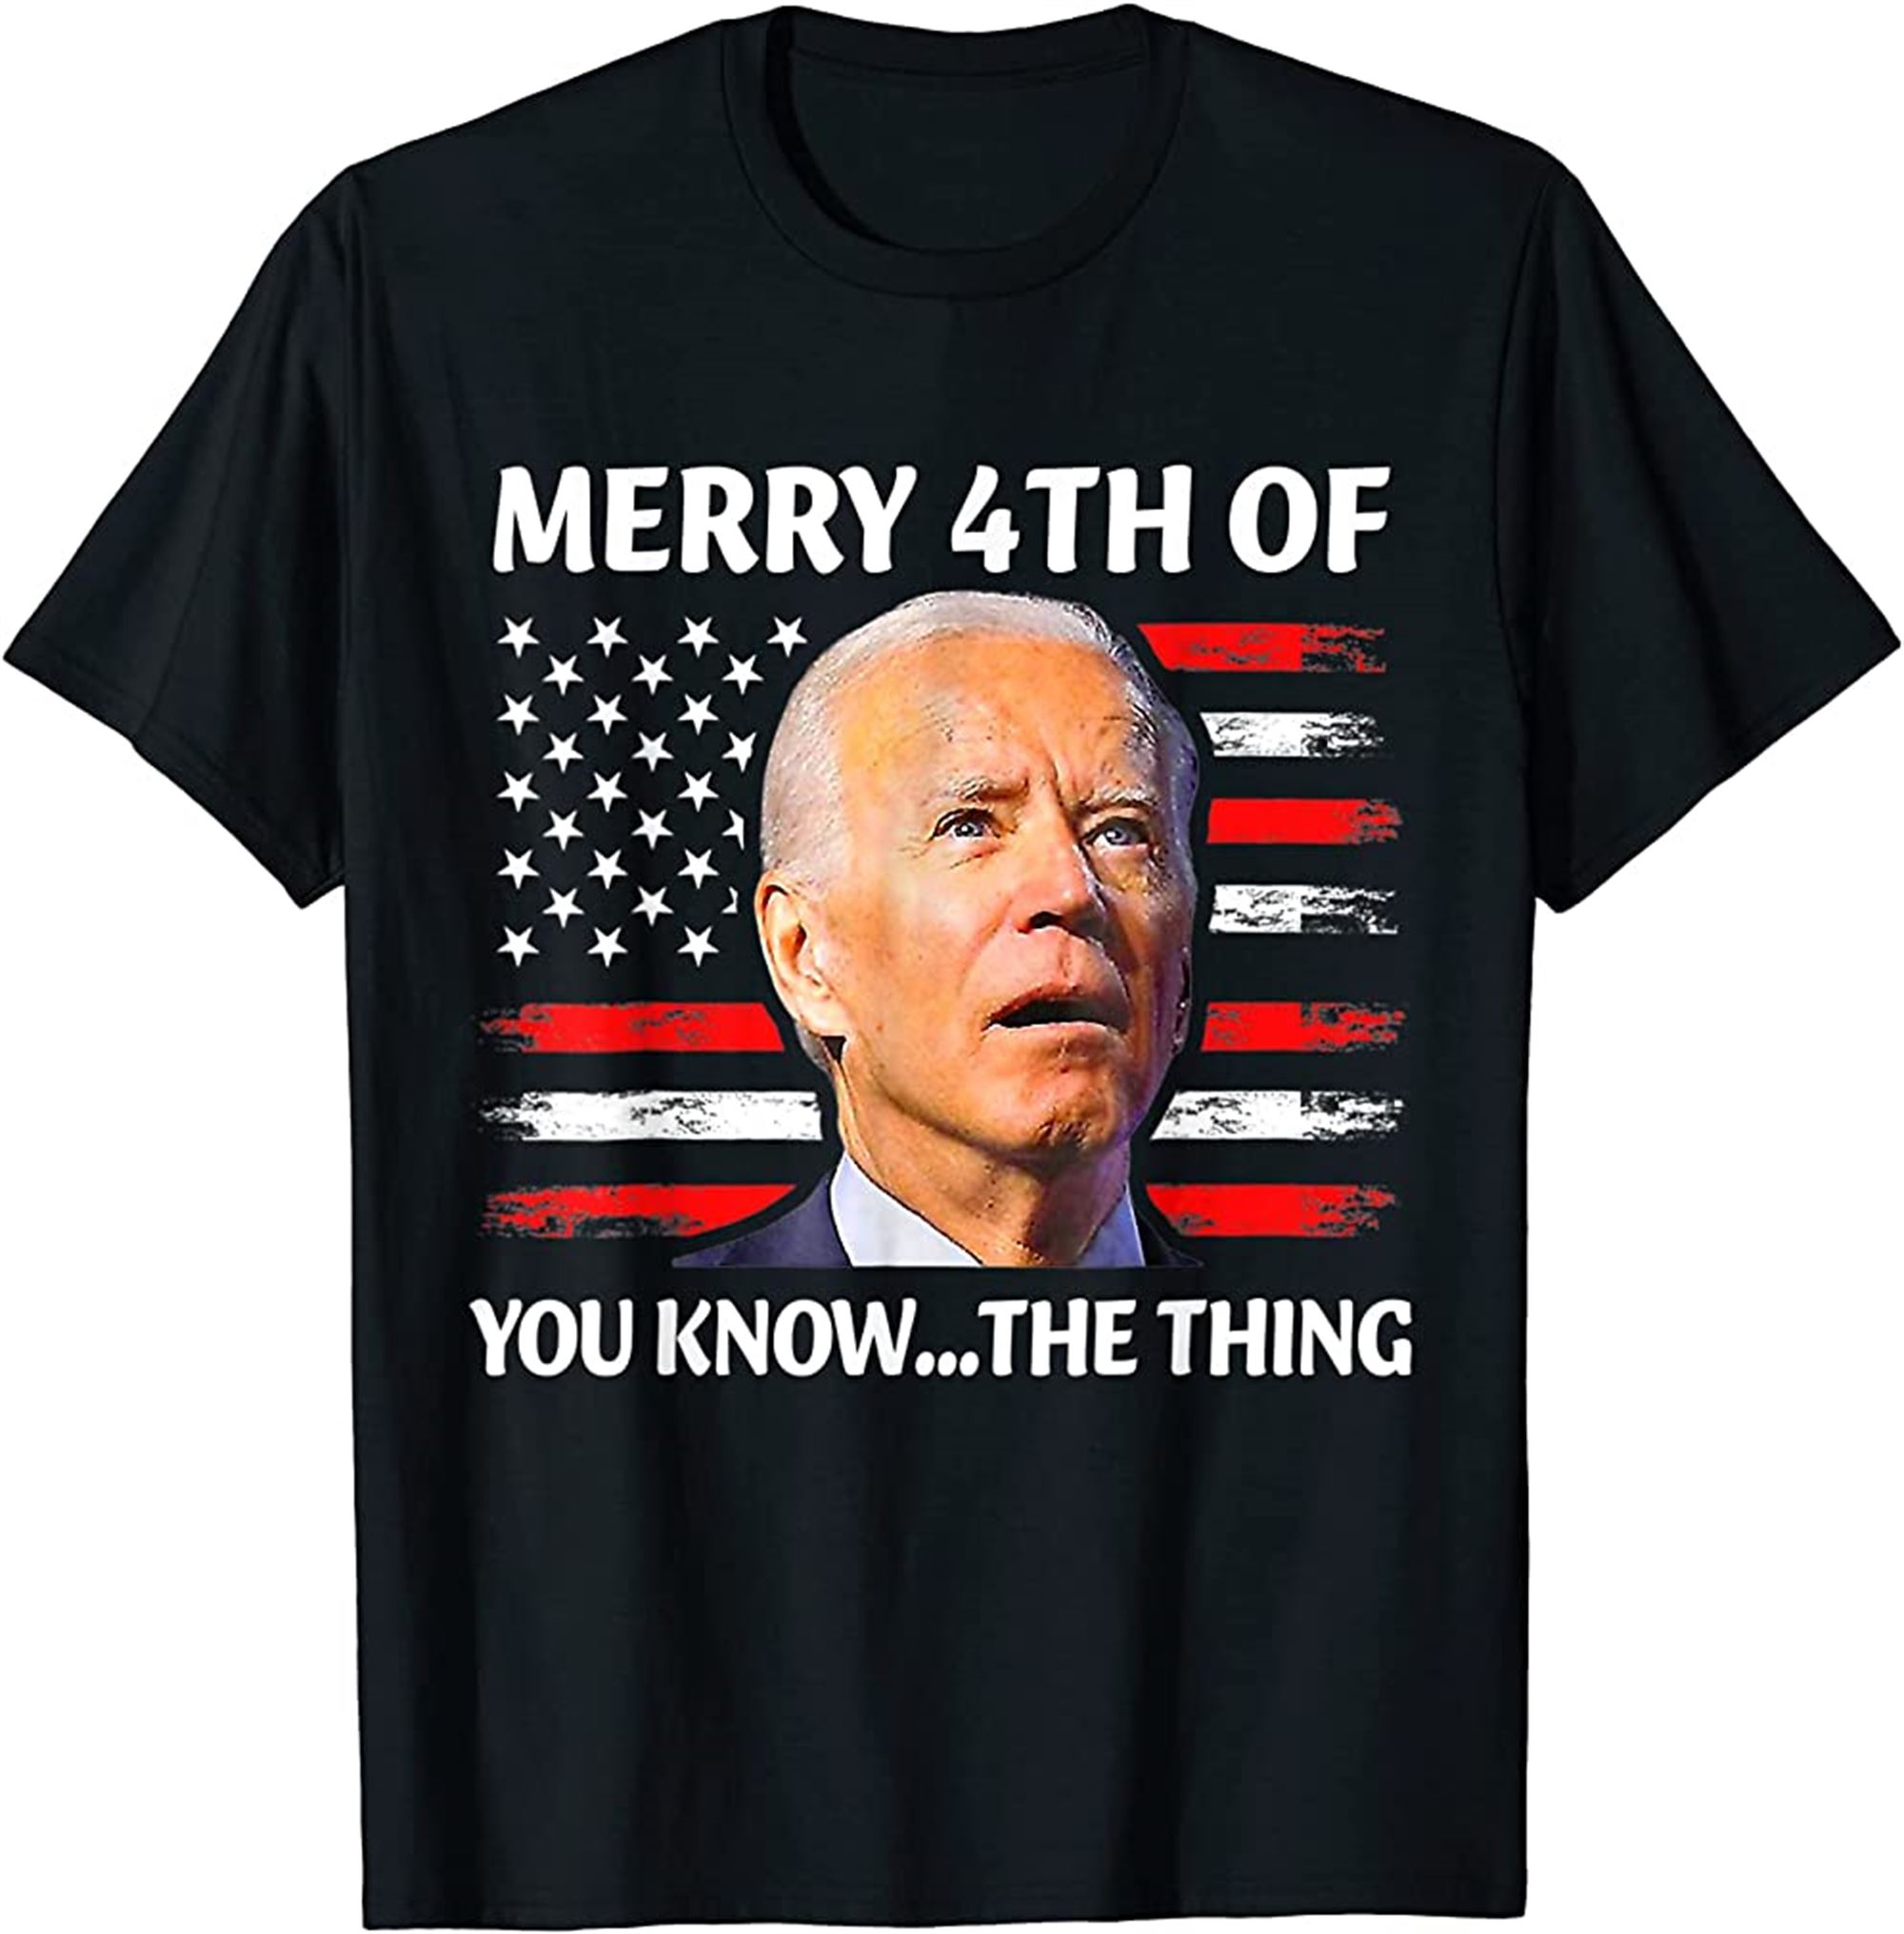 Merry 4th Of You Knowthe Thing Happy 4th Of July Memorial T-shirt Plus Size Up To 5xl